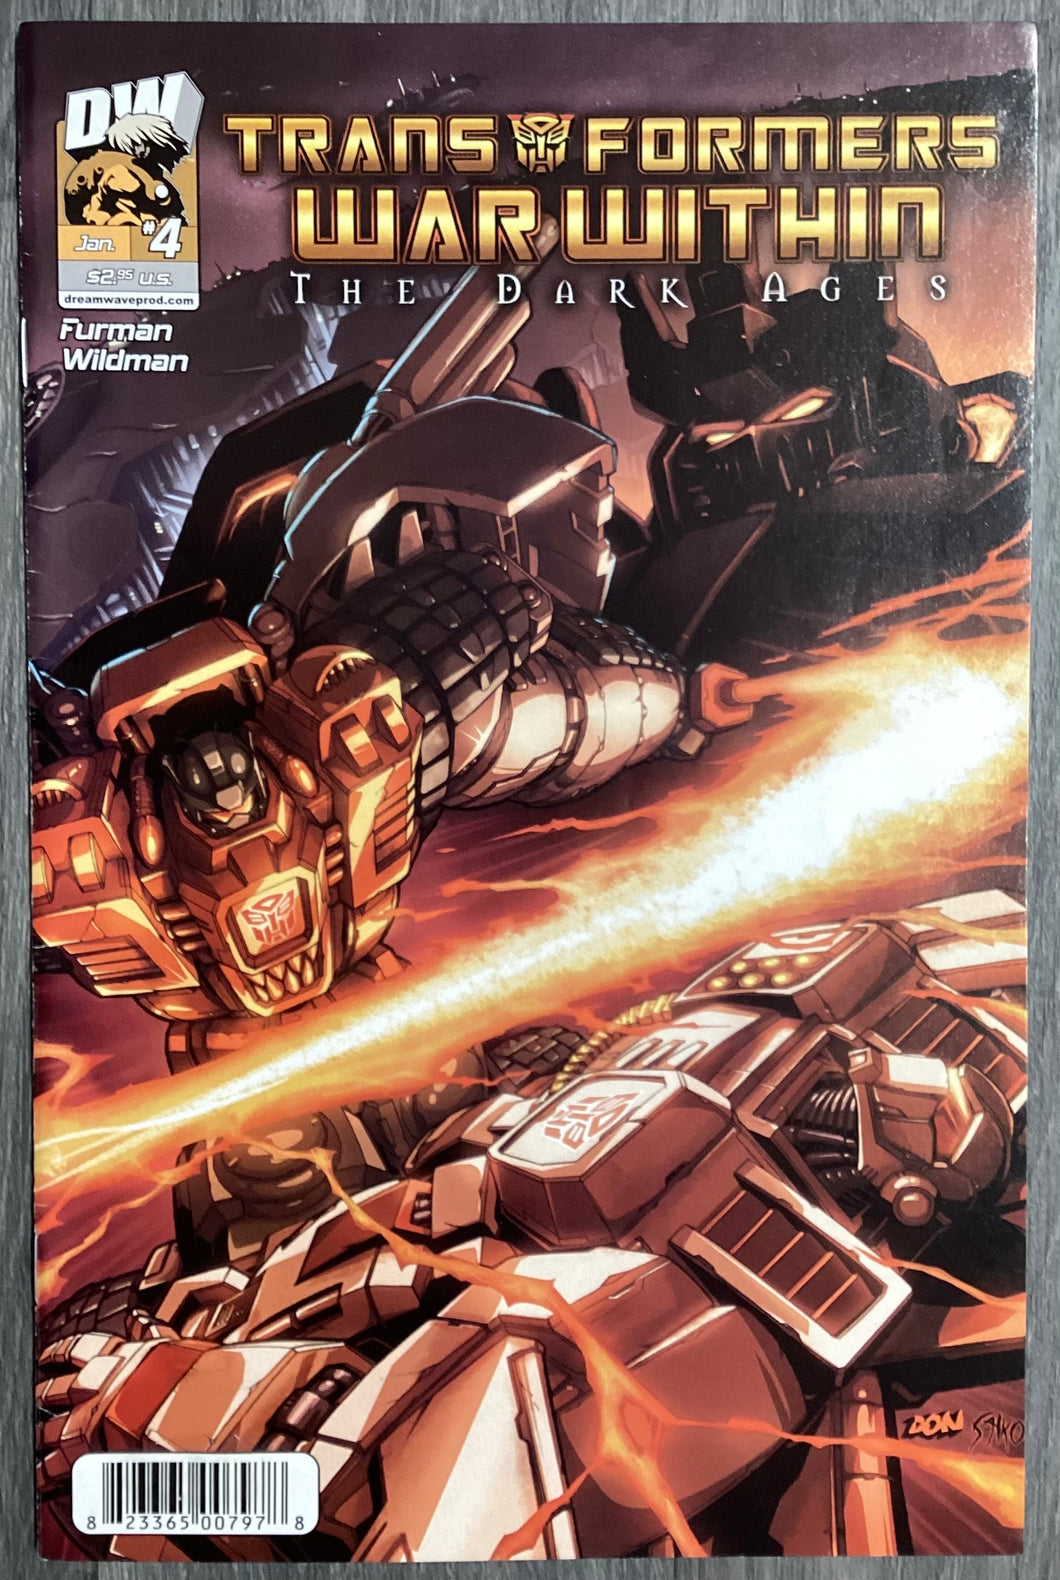 The Transformers War Within: The Dark Ages No. #4 2004 Dreamwave Productions